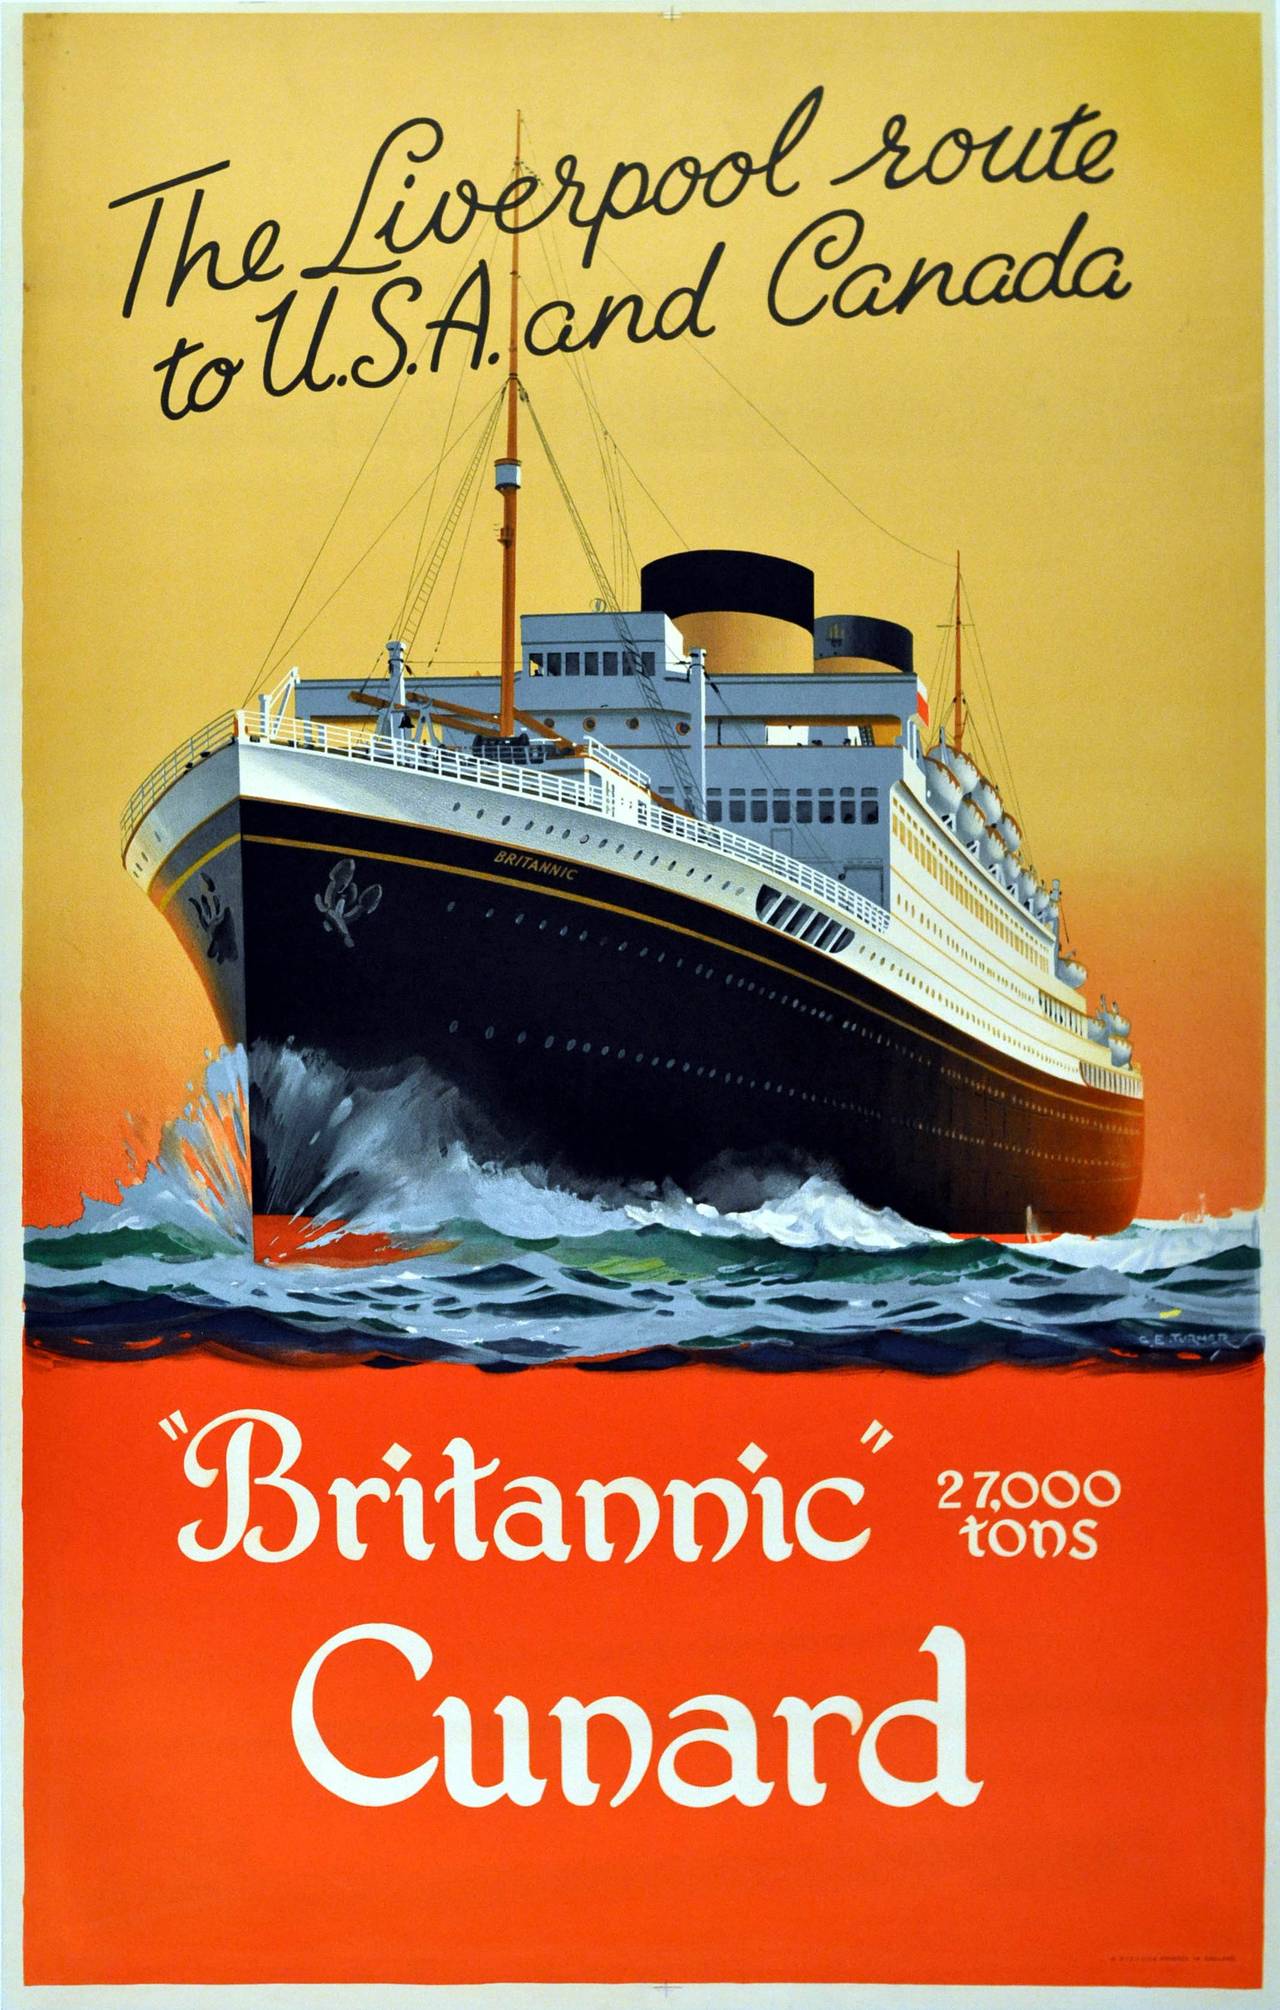 Charles Eddowes Turner Print - Original 1930s Poster for Cunard Britannic The Liverpool Route to USA and Canada